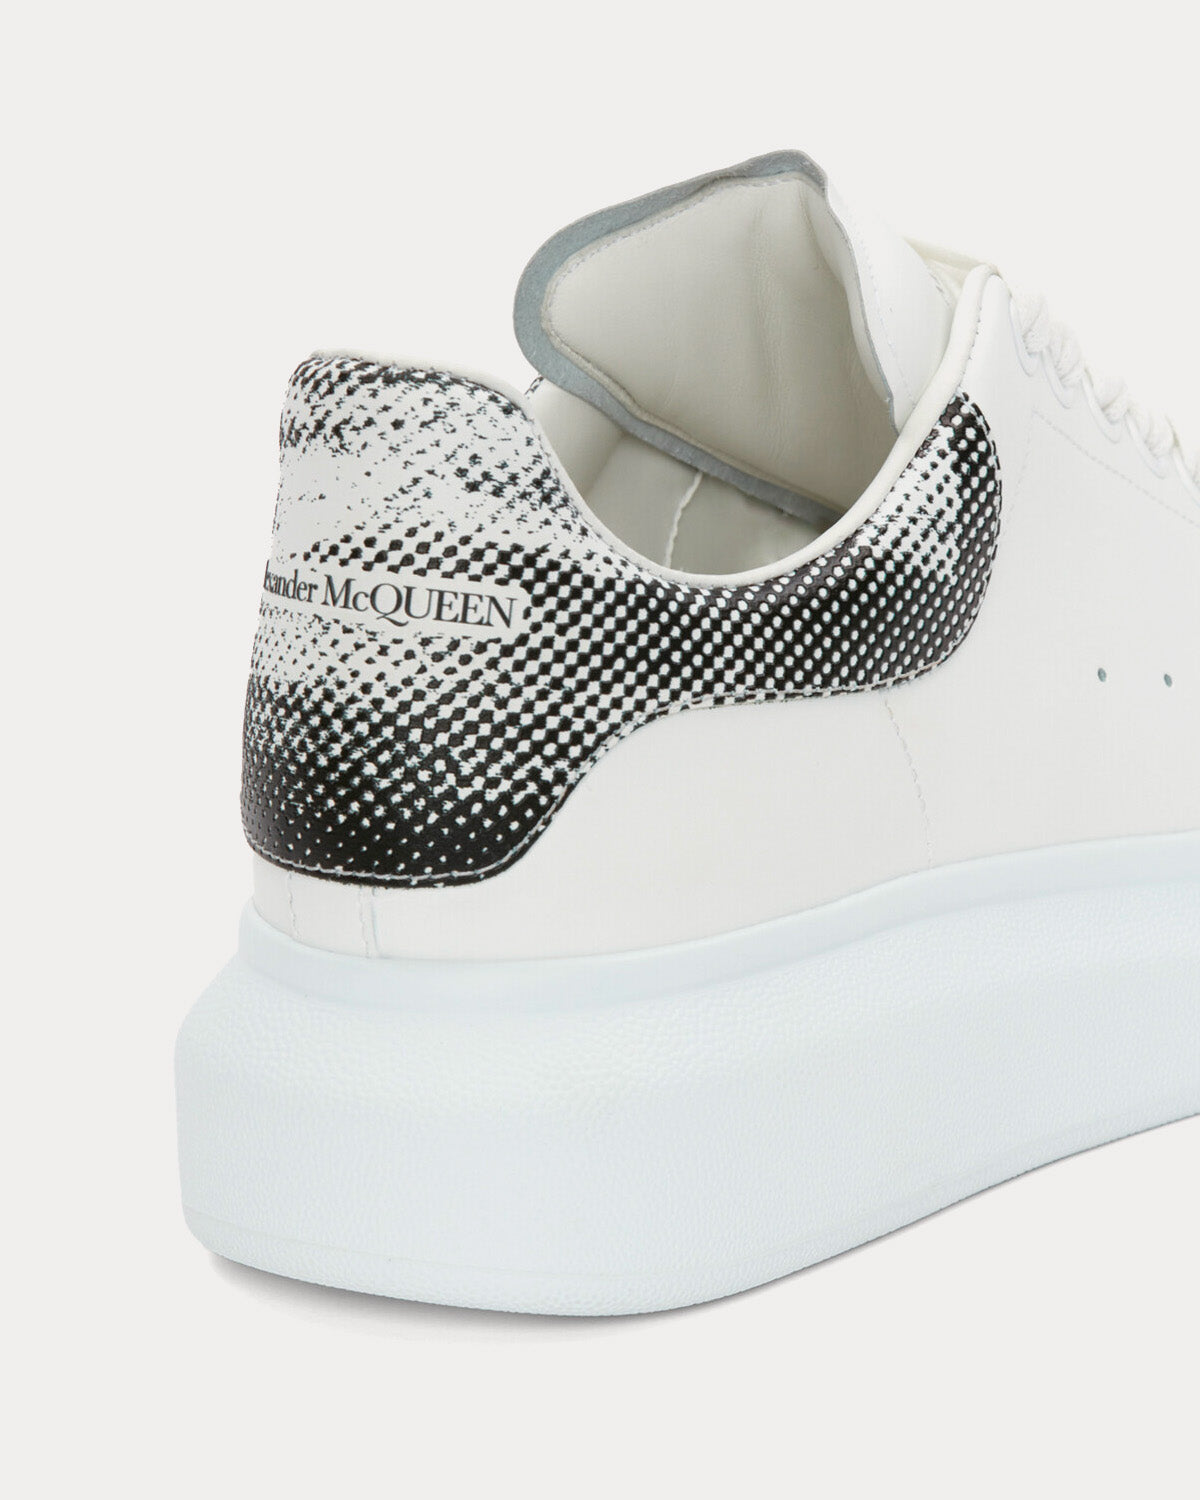 Alexander McQueen - Oversized Exploded Pixelated Print White / Black Low Top Sneakers